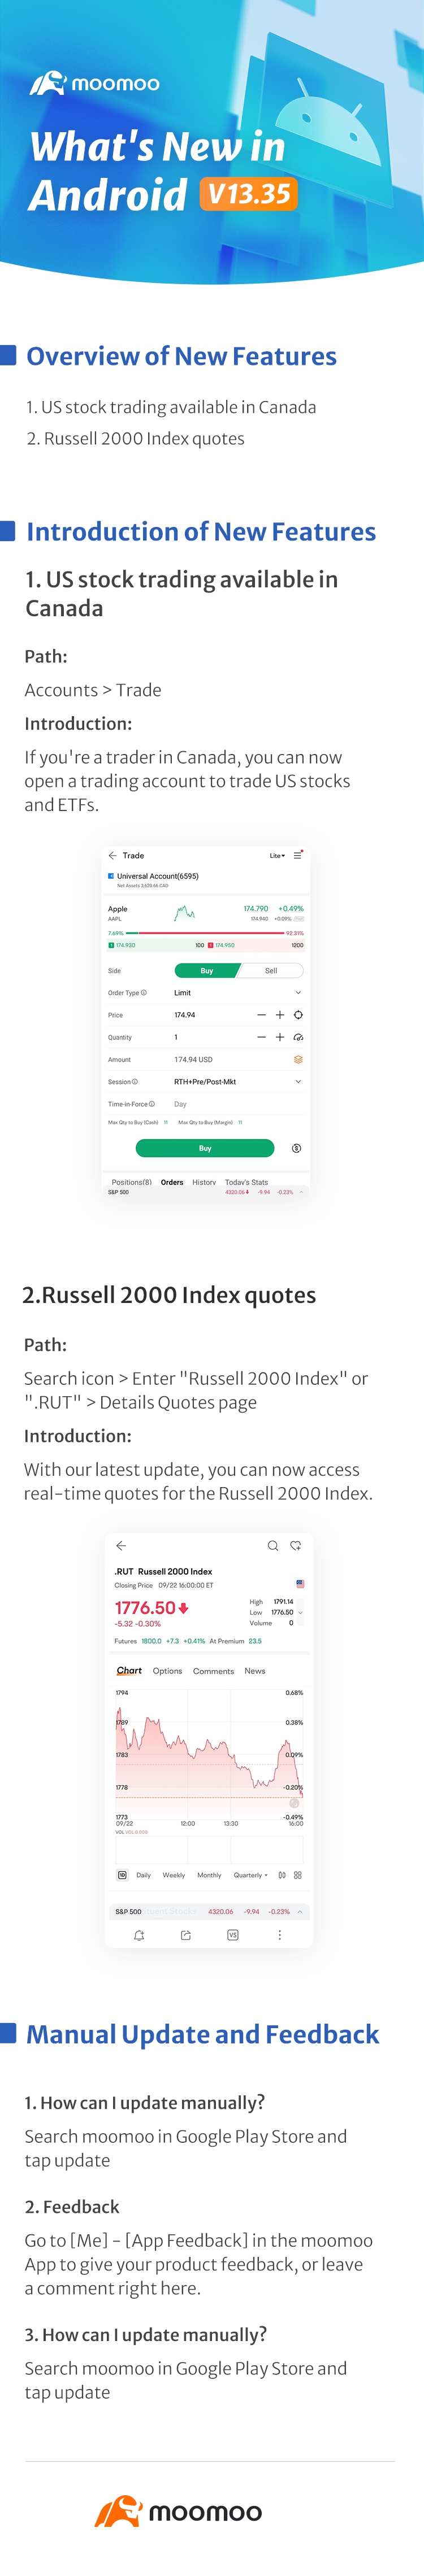 What's New: Russell 2000 Index quotes and US stock trading in CA available in Android v13.35